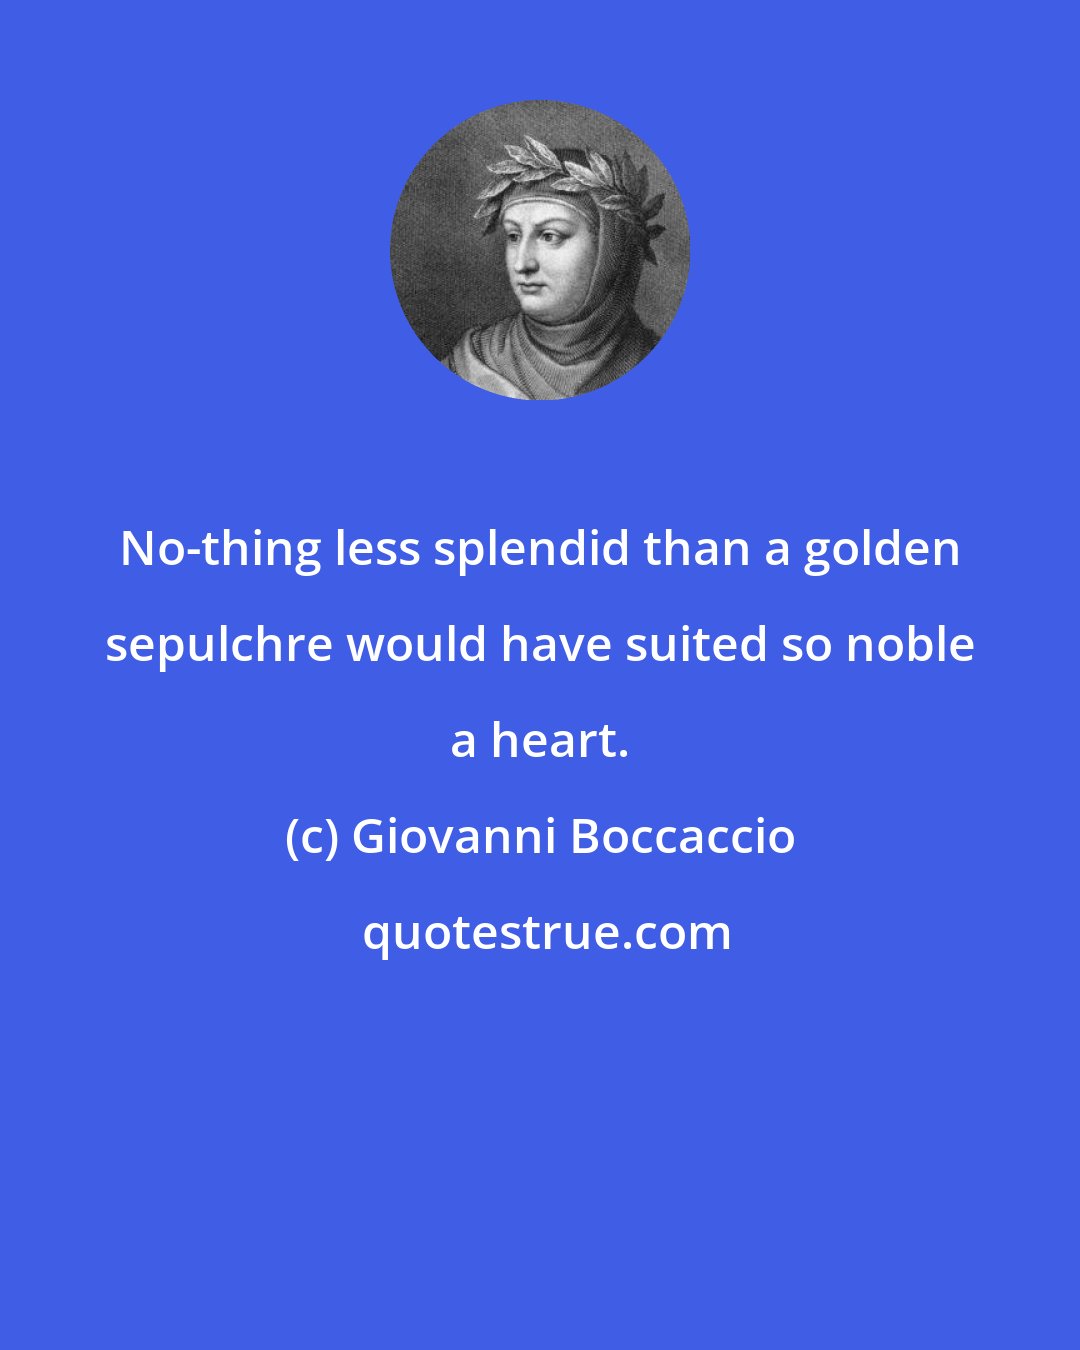 Giovanni Boccaccio: No-thing less splendid than a golden sepulchre would have suited so noble a heart.